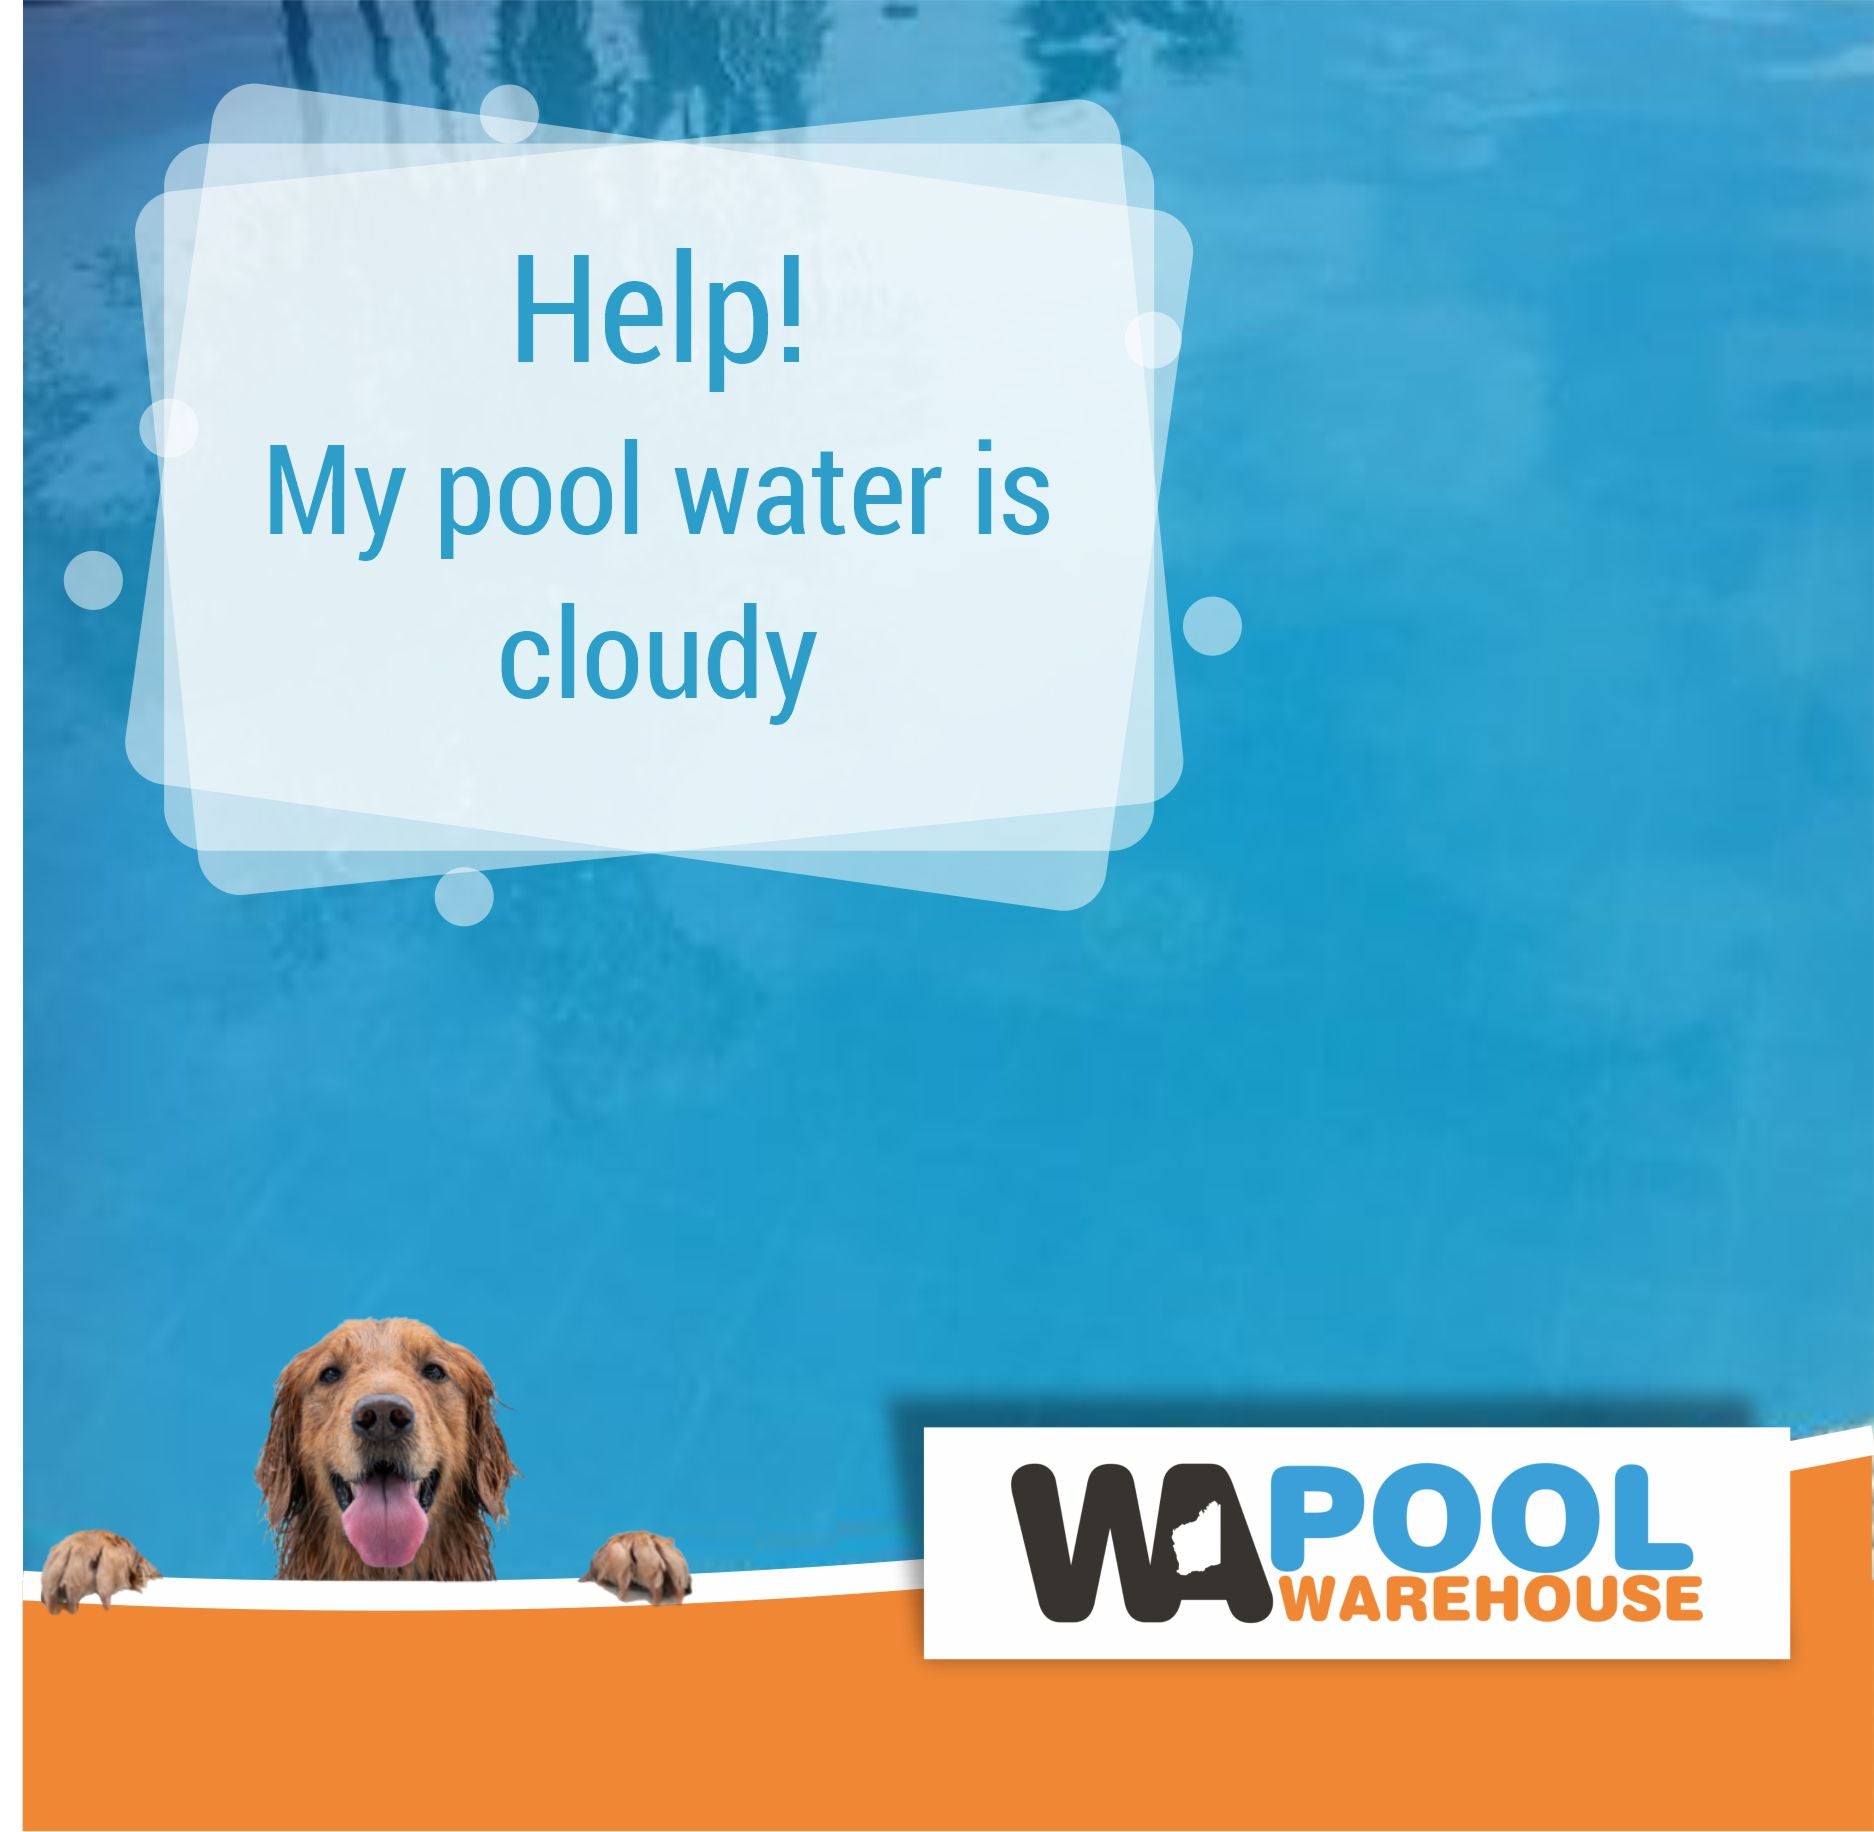 My pool is cloudy - how do I fix it?